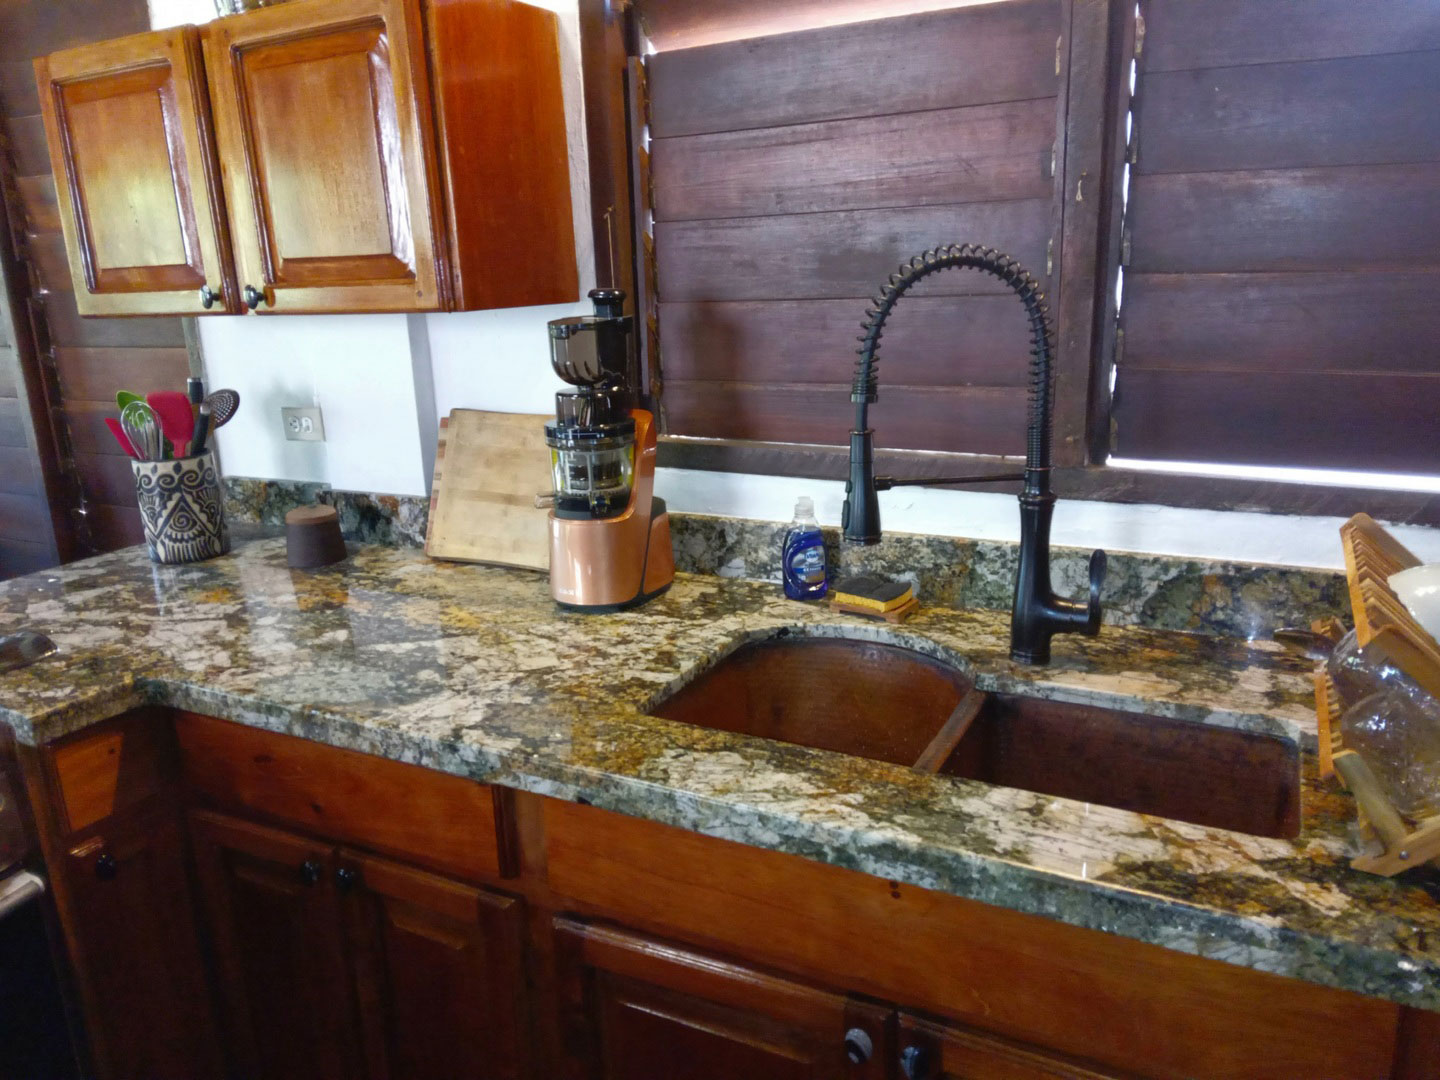 Undermounted copper sink in kitchen with granite countertop and wood shutters World CopperSmith